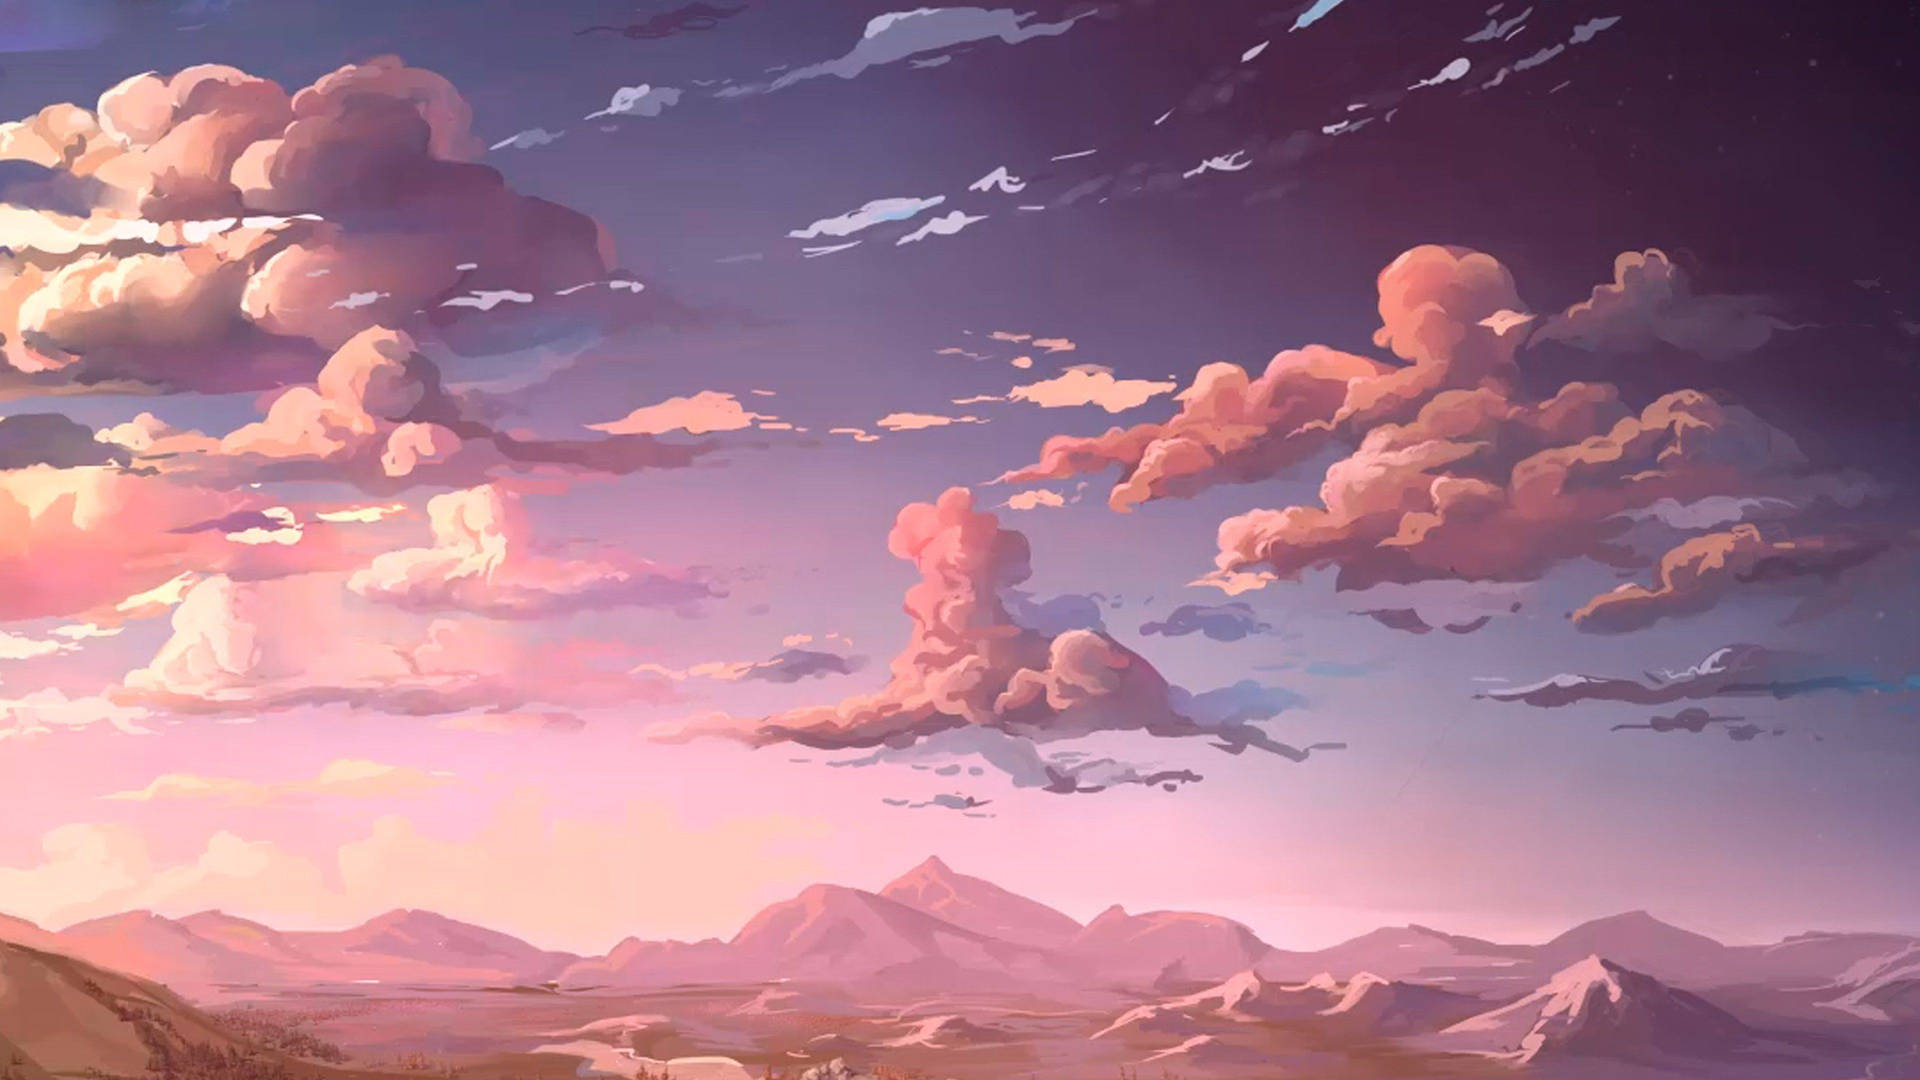 Anime Clouds And Mountains Aesthetic Mac Background